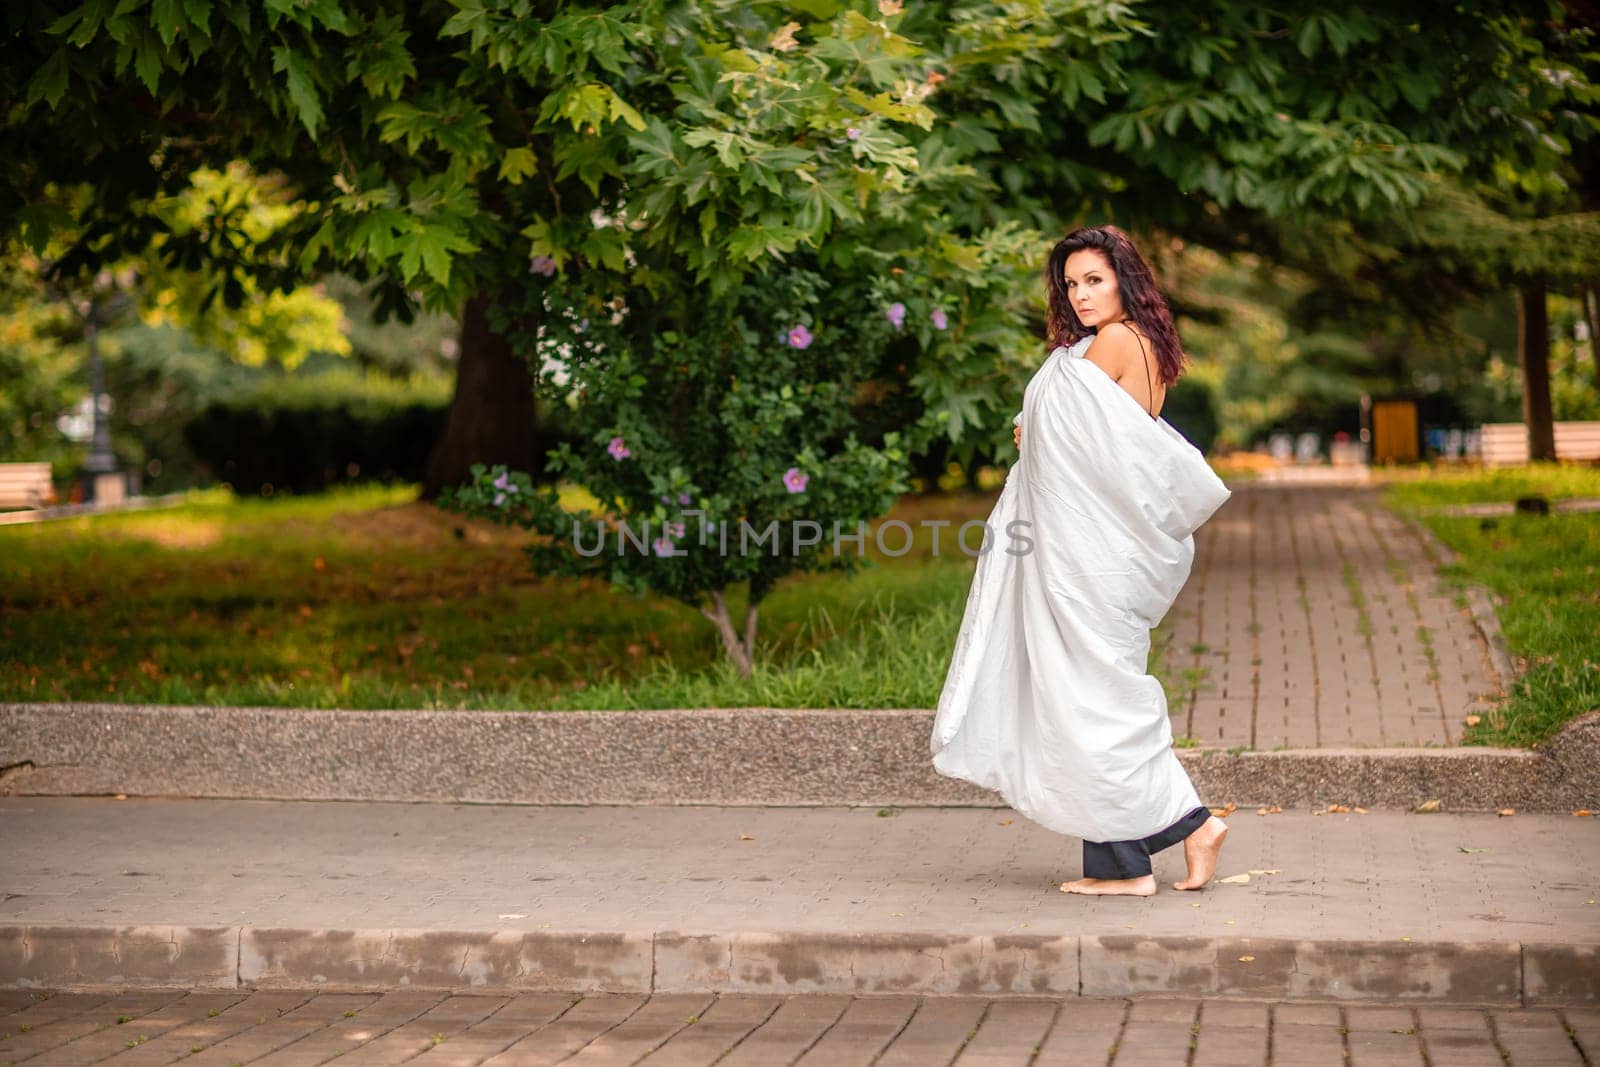 Woman city blanket. Morning in the big city. A blonde woman in a white blanket is enjoying in the city center. Photographed for social media.